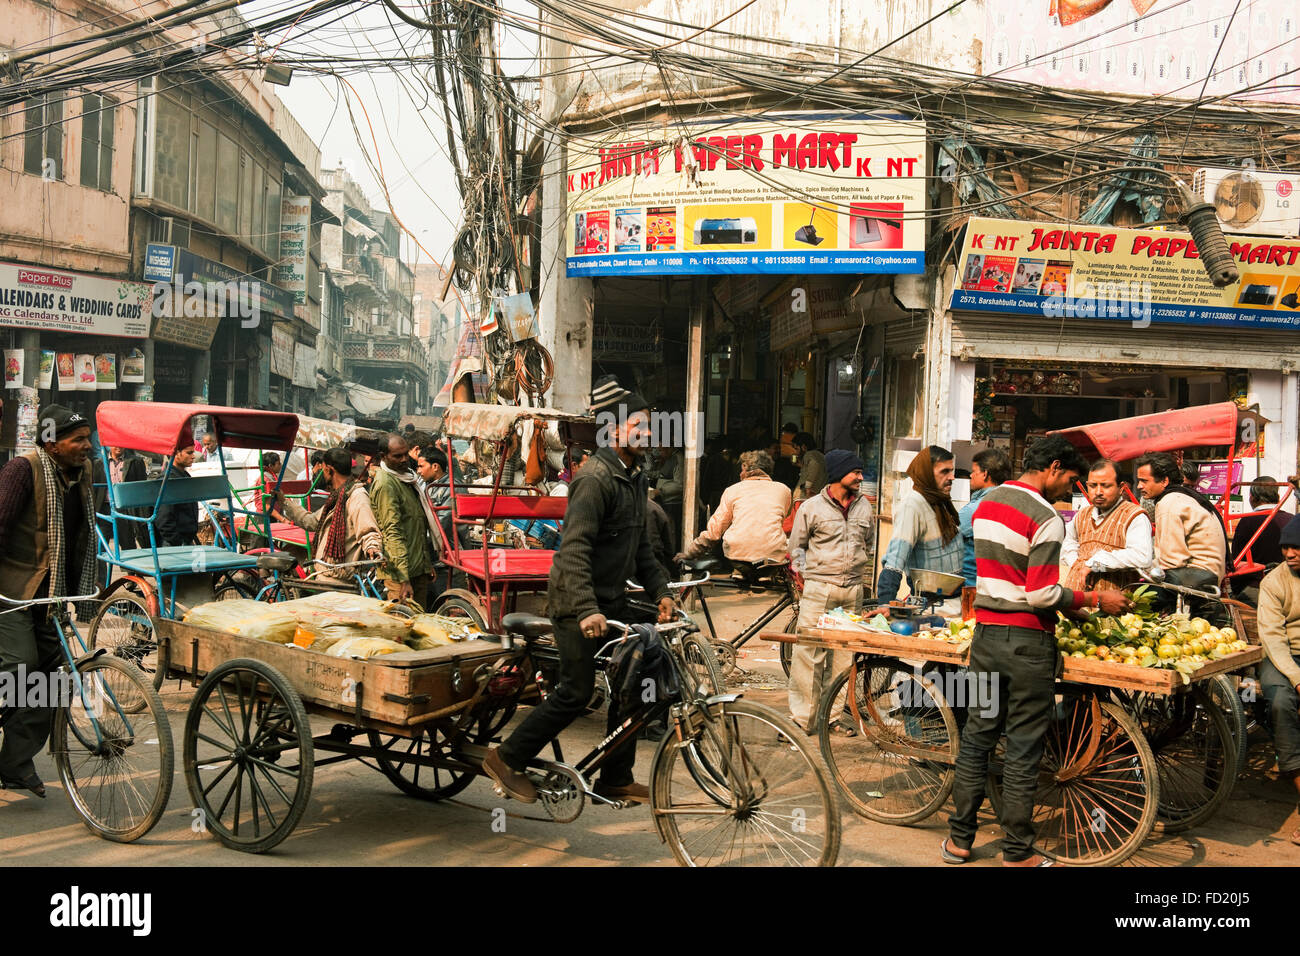 A street scene in Chandni Chowk market, Old Delhi, India with rickshaw and driver and street vendors on a crowded street Stock Photo